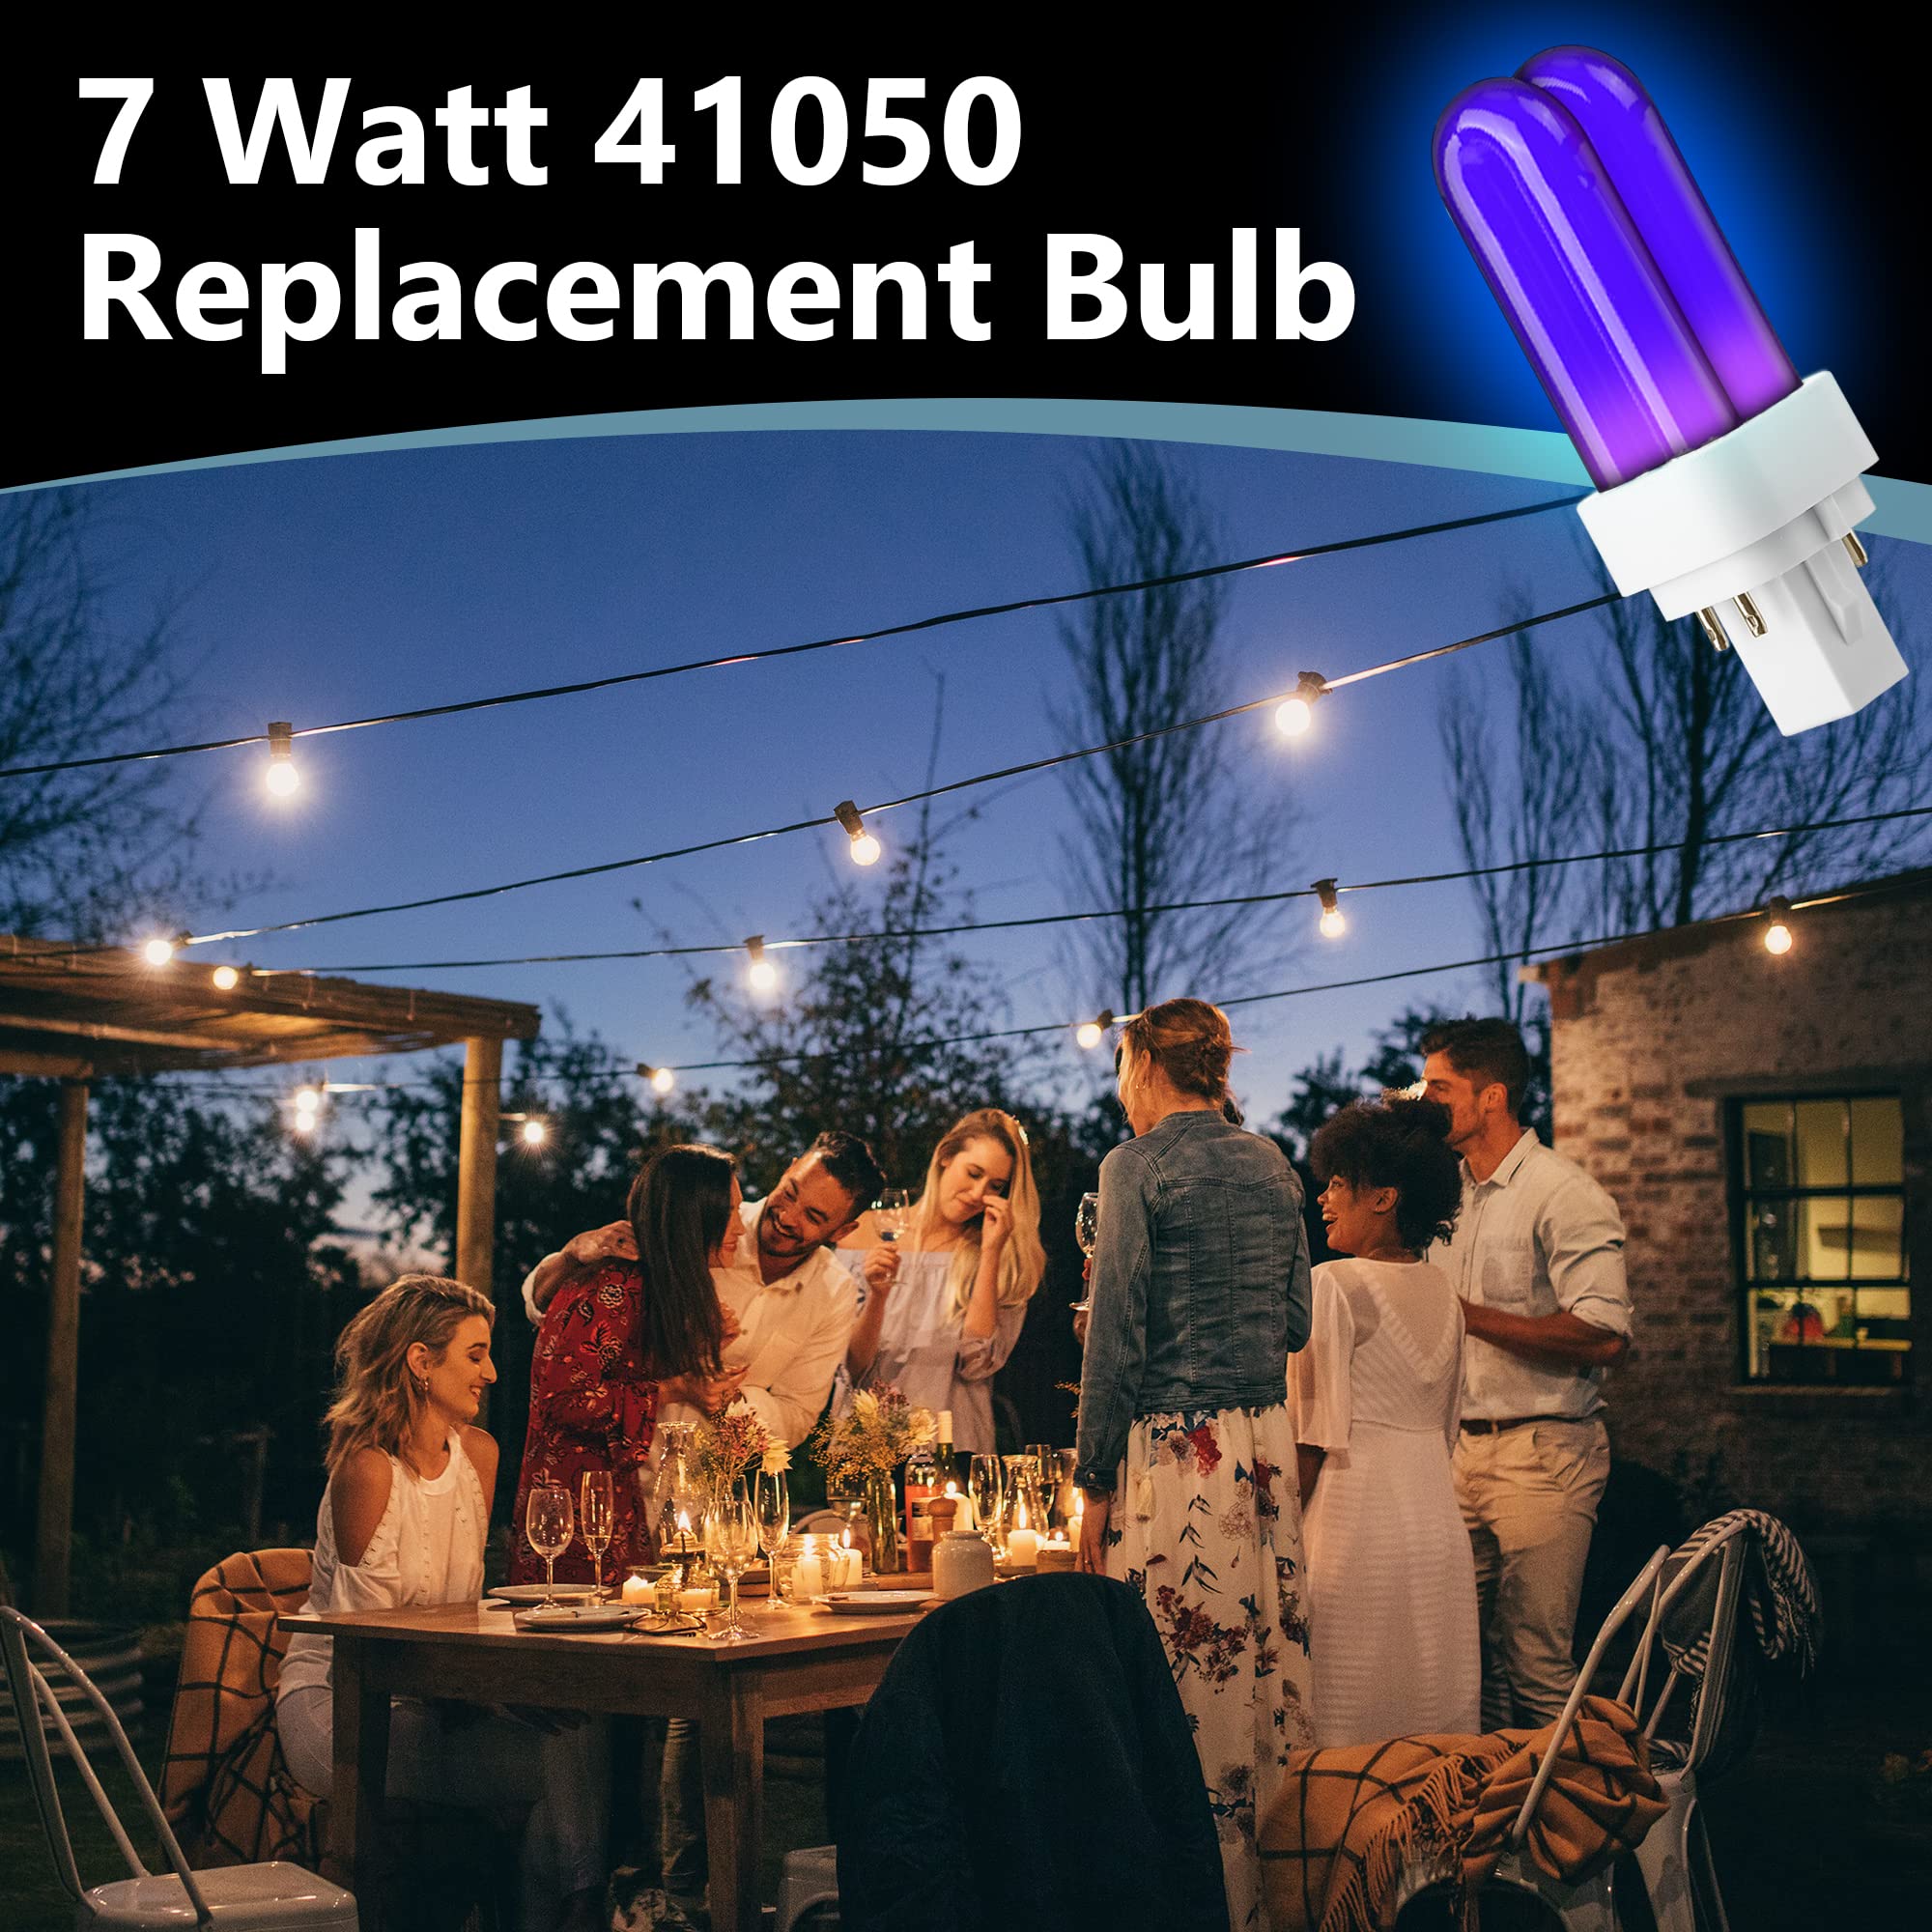 Kittmip 41050 7W Replacement UV Bulbs Compatible with DynaTrap DT1050 DT1100 DT1250, 1/2 Acre Trap Replacement Light Bulb, UV Light Ultraviolet Mosquito Killer Lamp Light Bulbs (4 Pack)